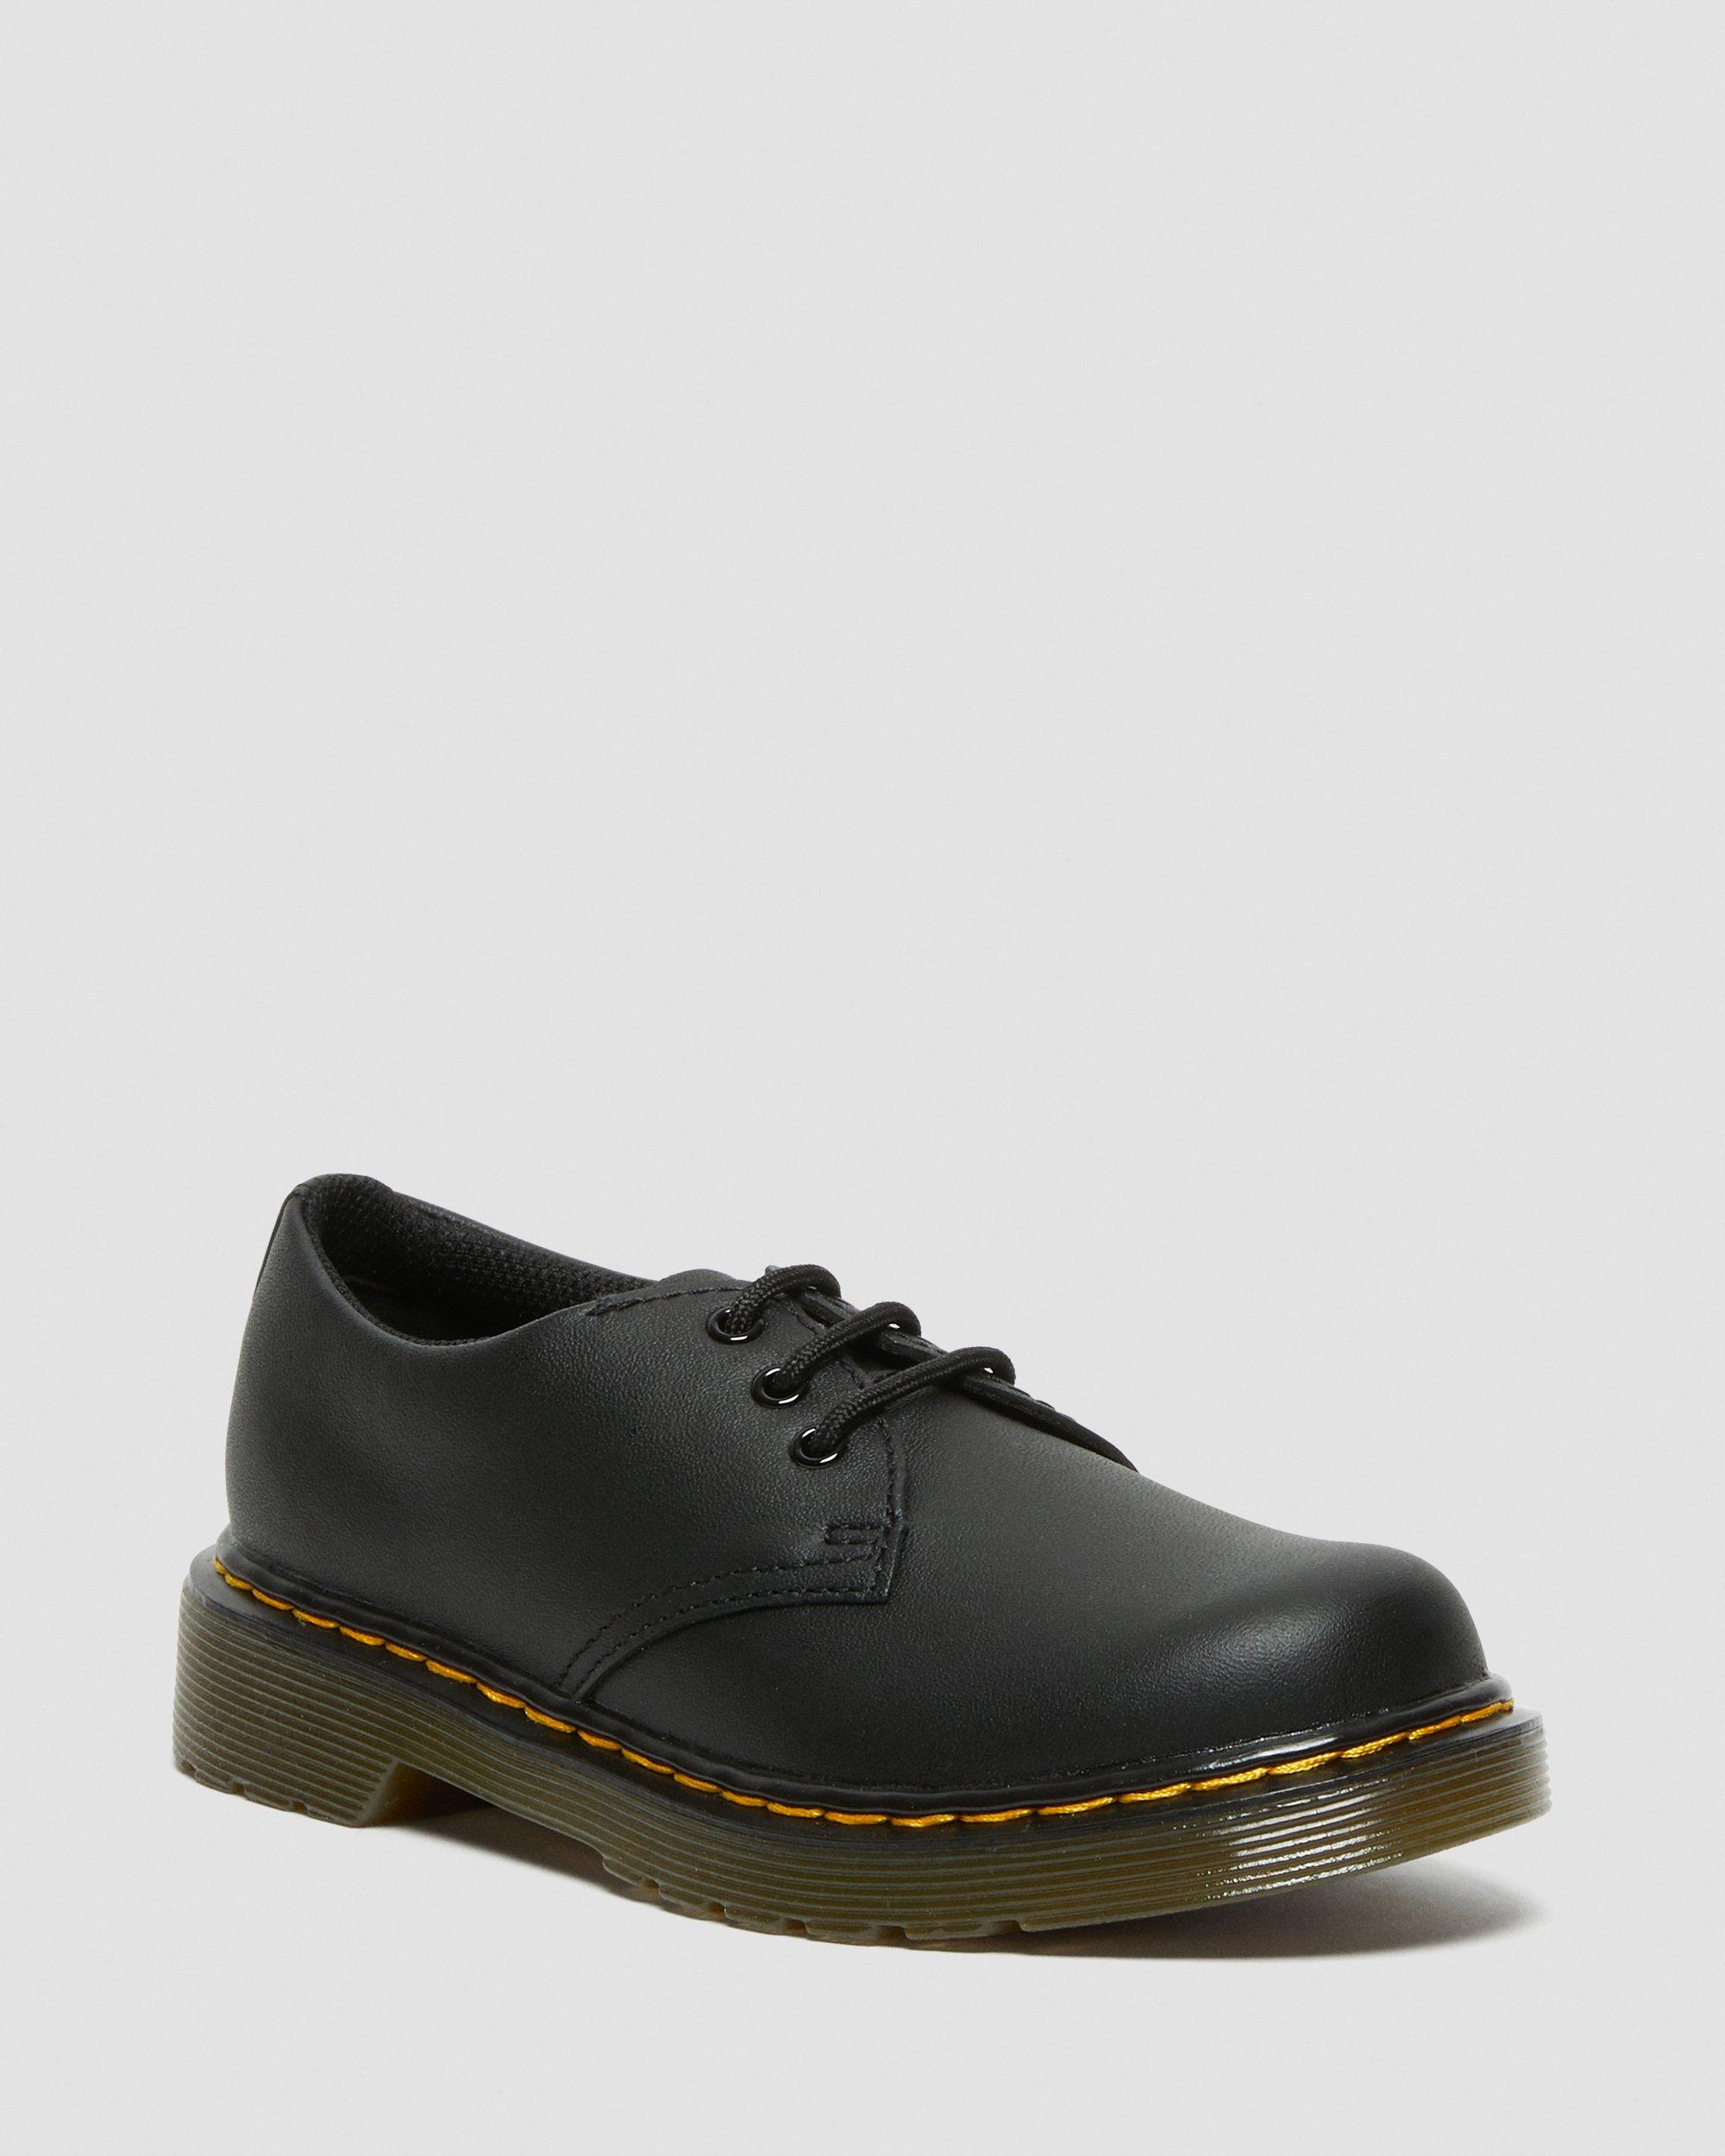 Junior 1461 Softy T Leather Shoes in Black